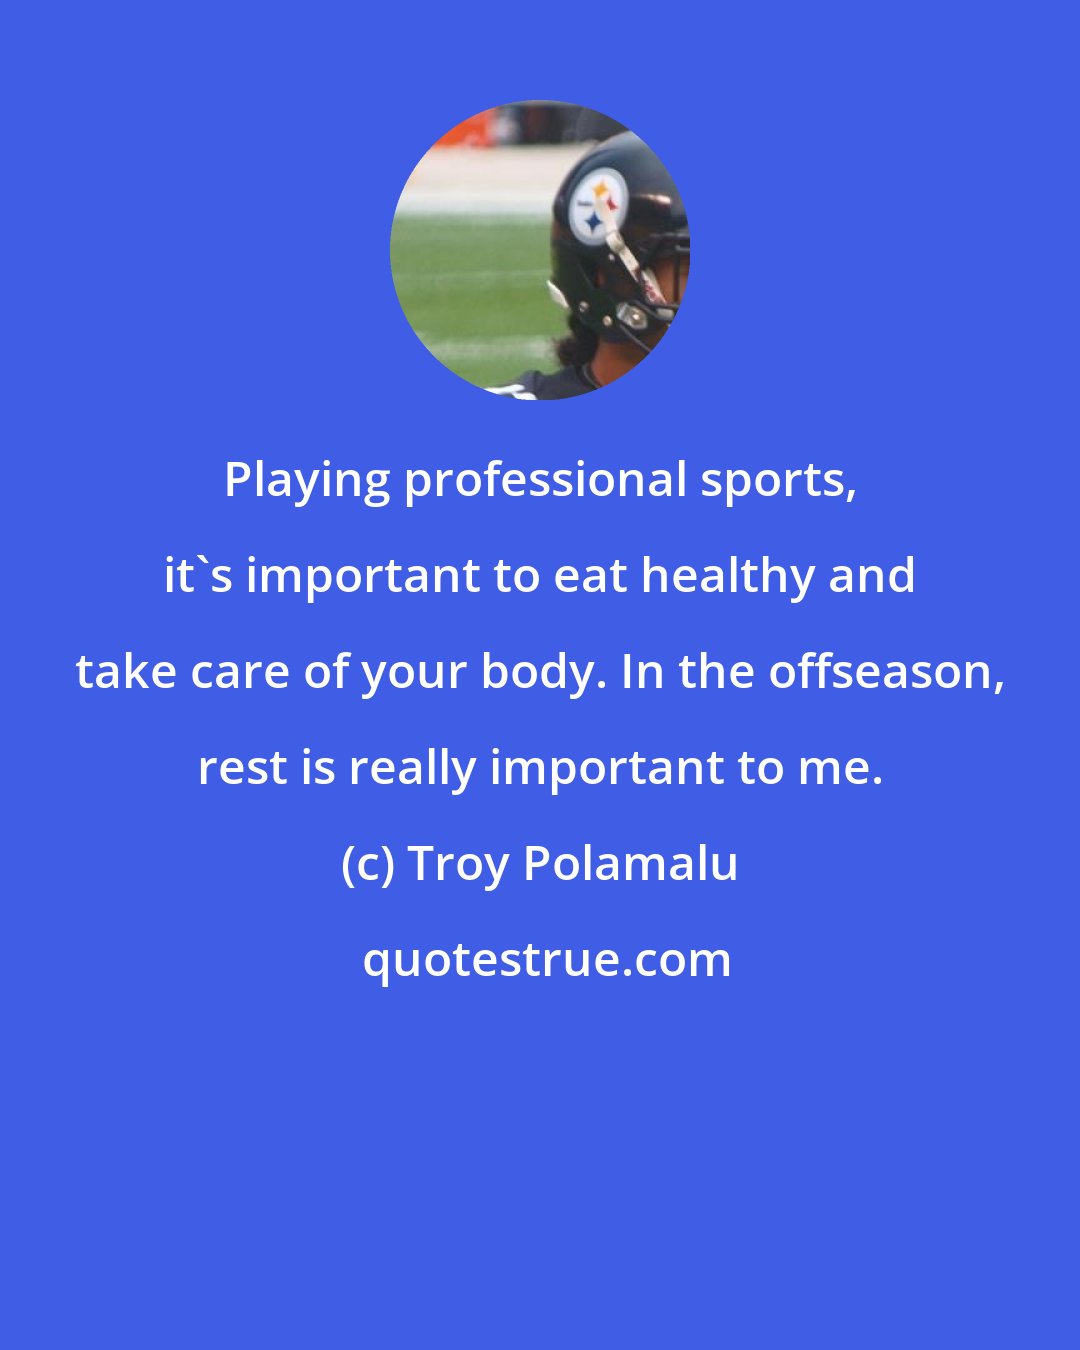 Troy Polamalu: Playing professional sports, it's important to eat healthy and take care of your body. In the offseason, rest is really important to me.